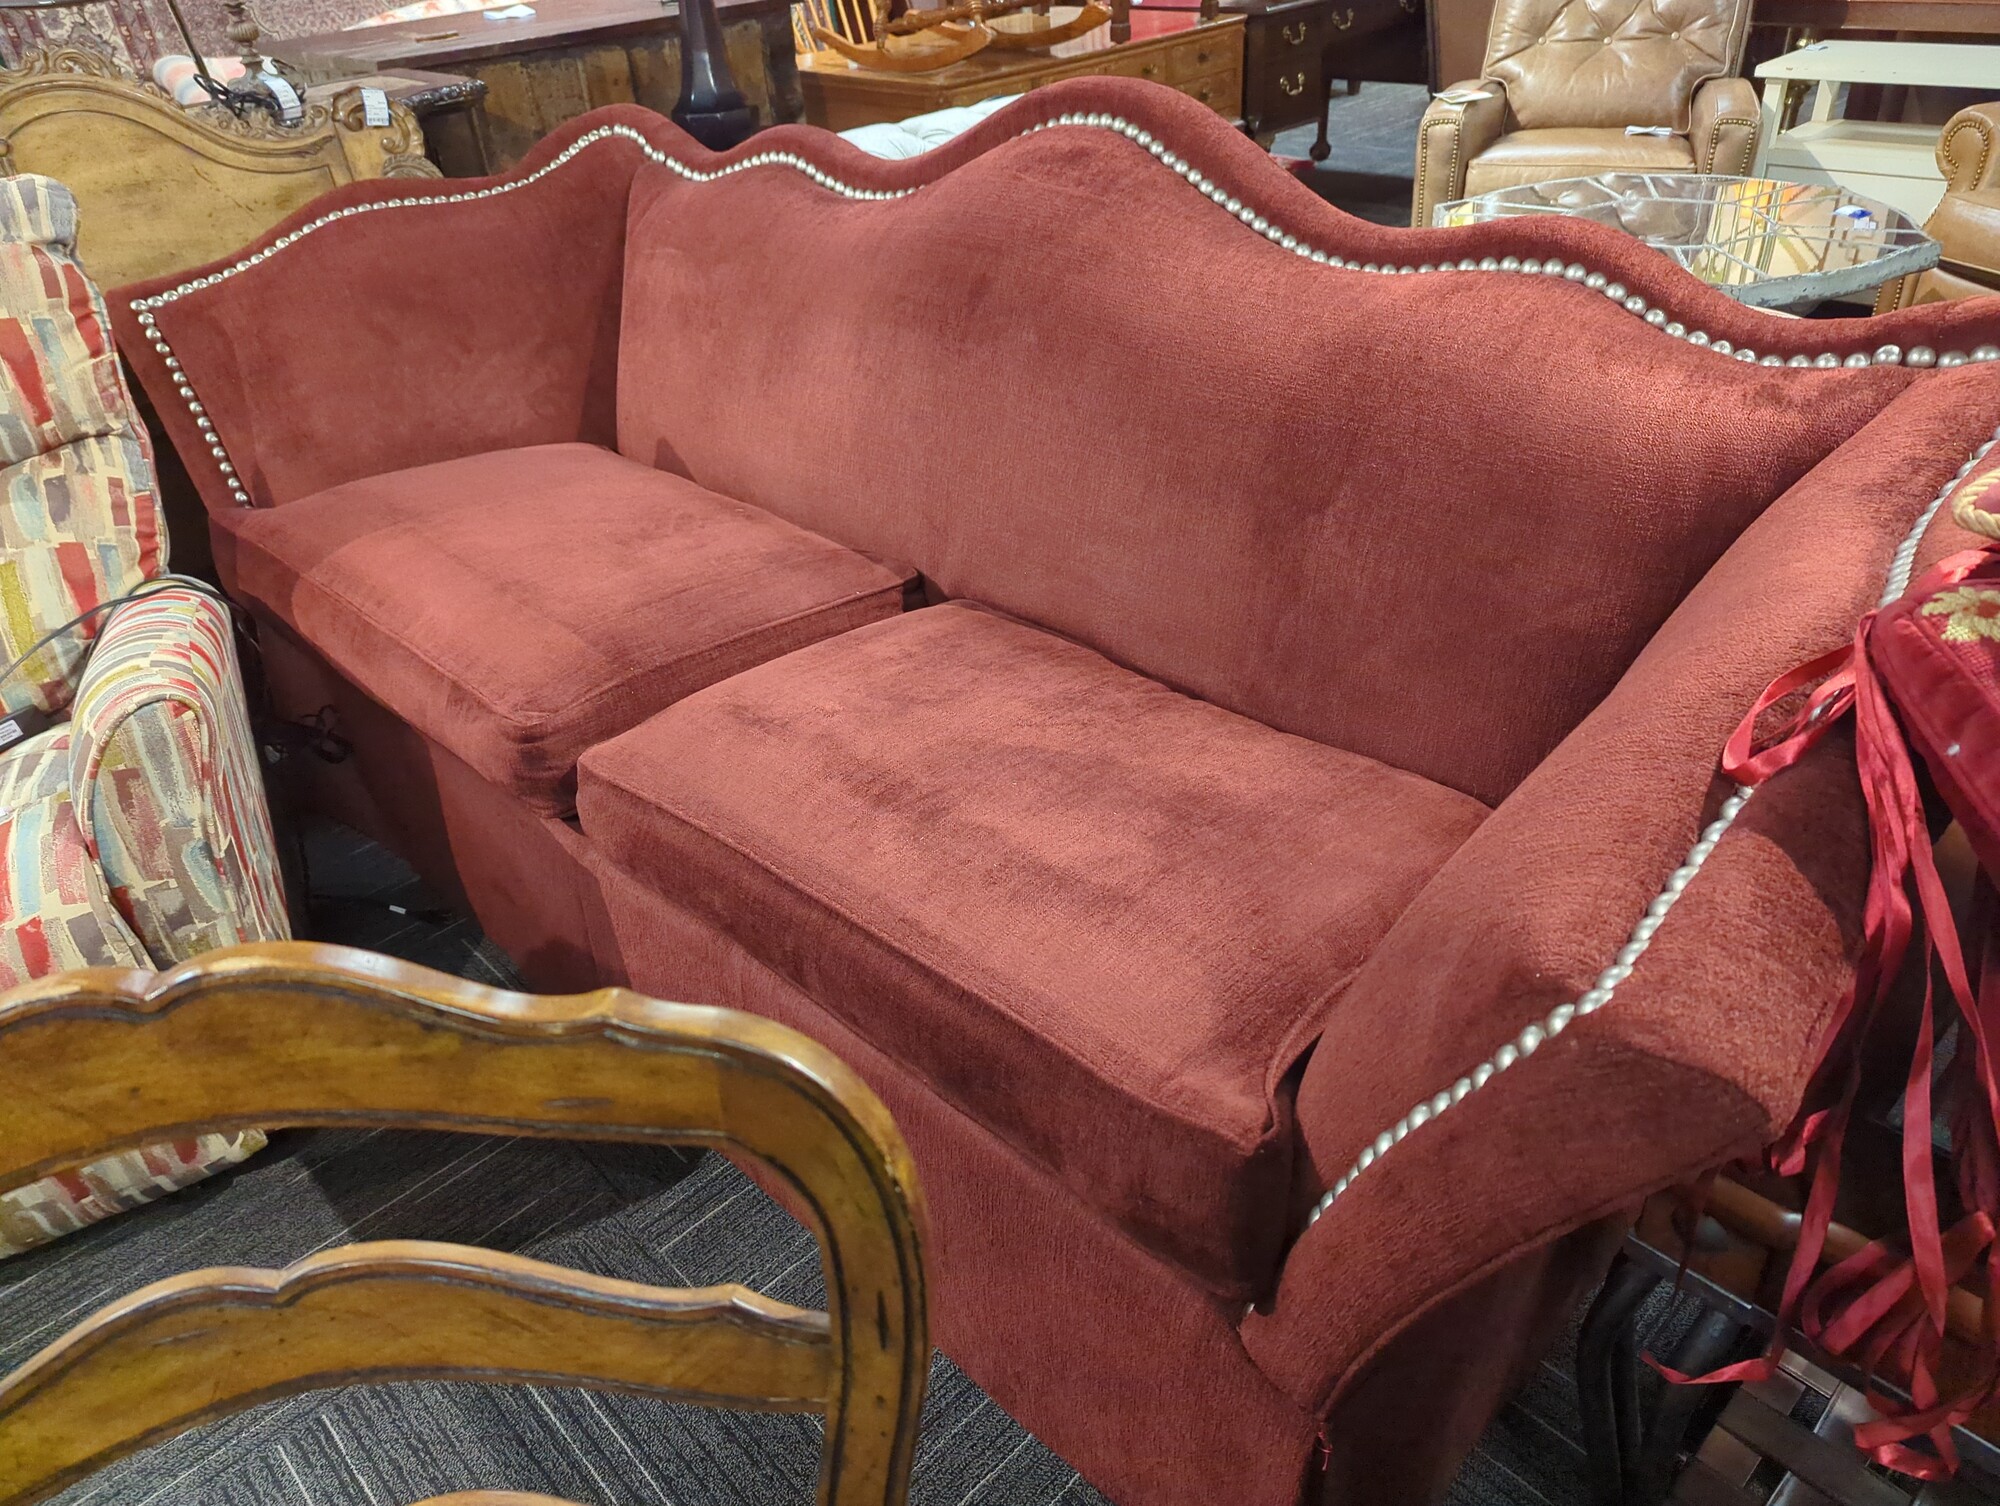 Formal high back sofa. 98in wide 42in high back.